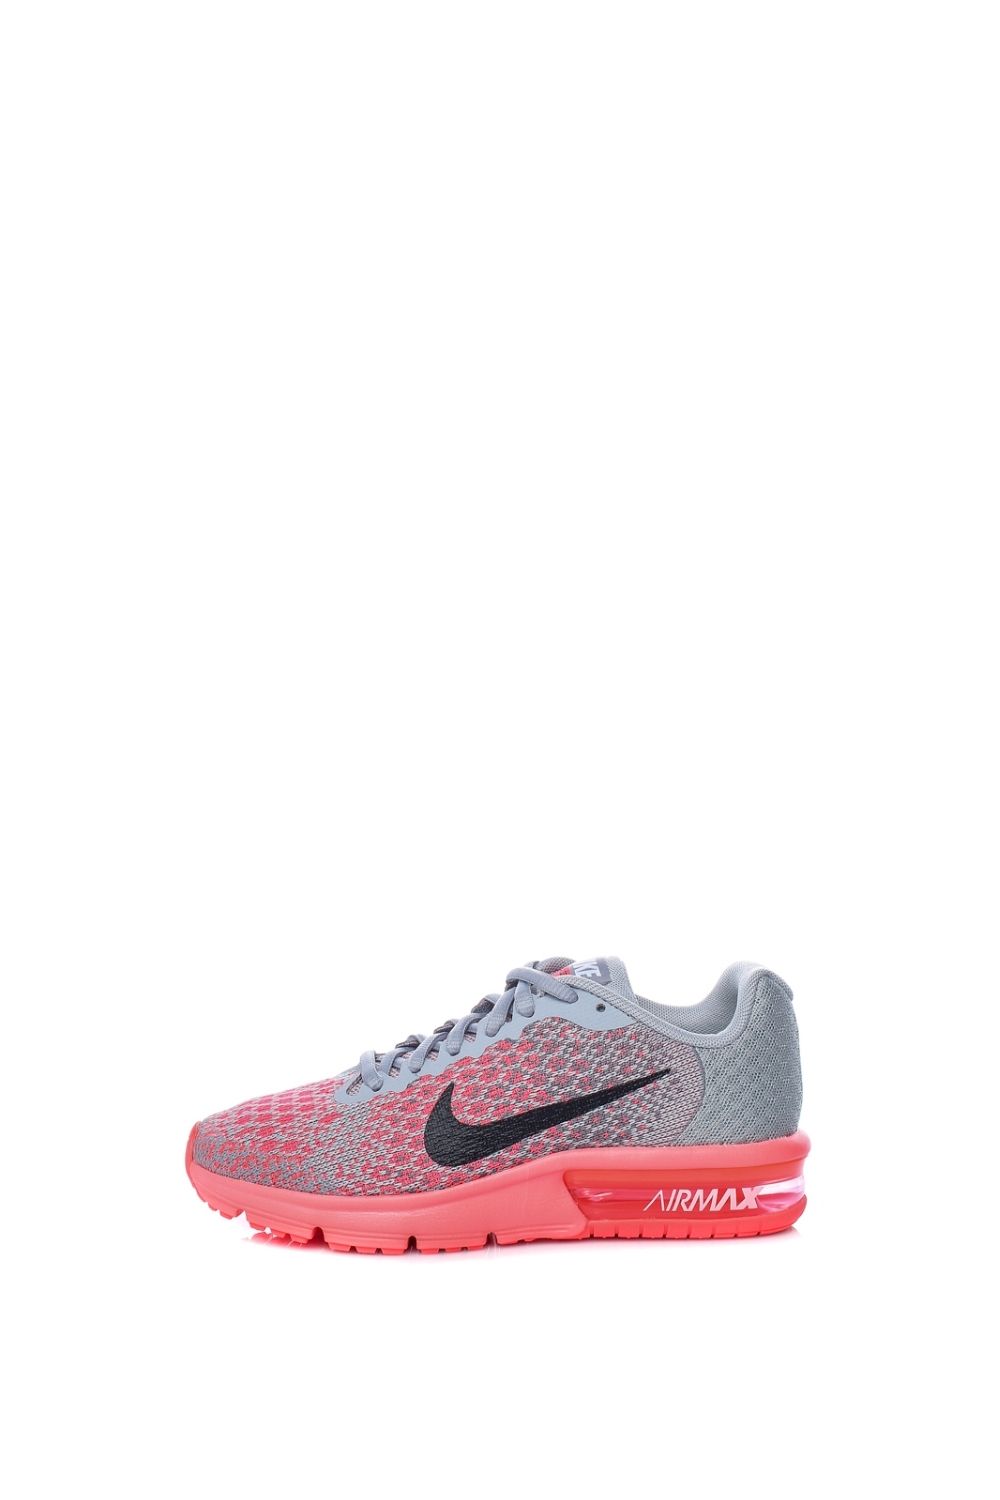 NIKE – Παιδικα παπουτσια running NIKE AIR MAX SEQUENT γκρι κοκκινα